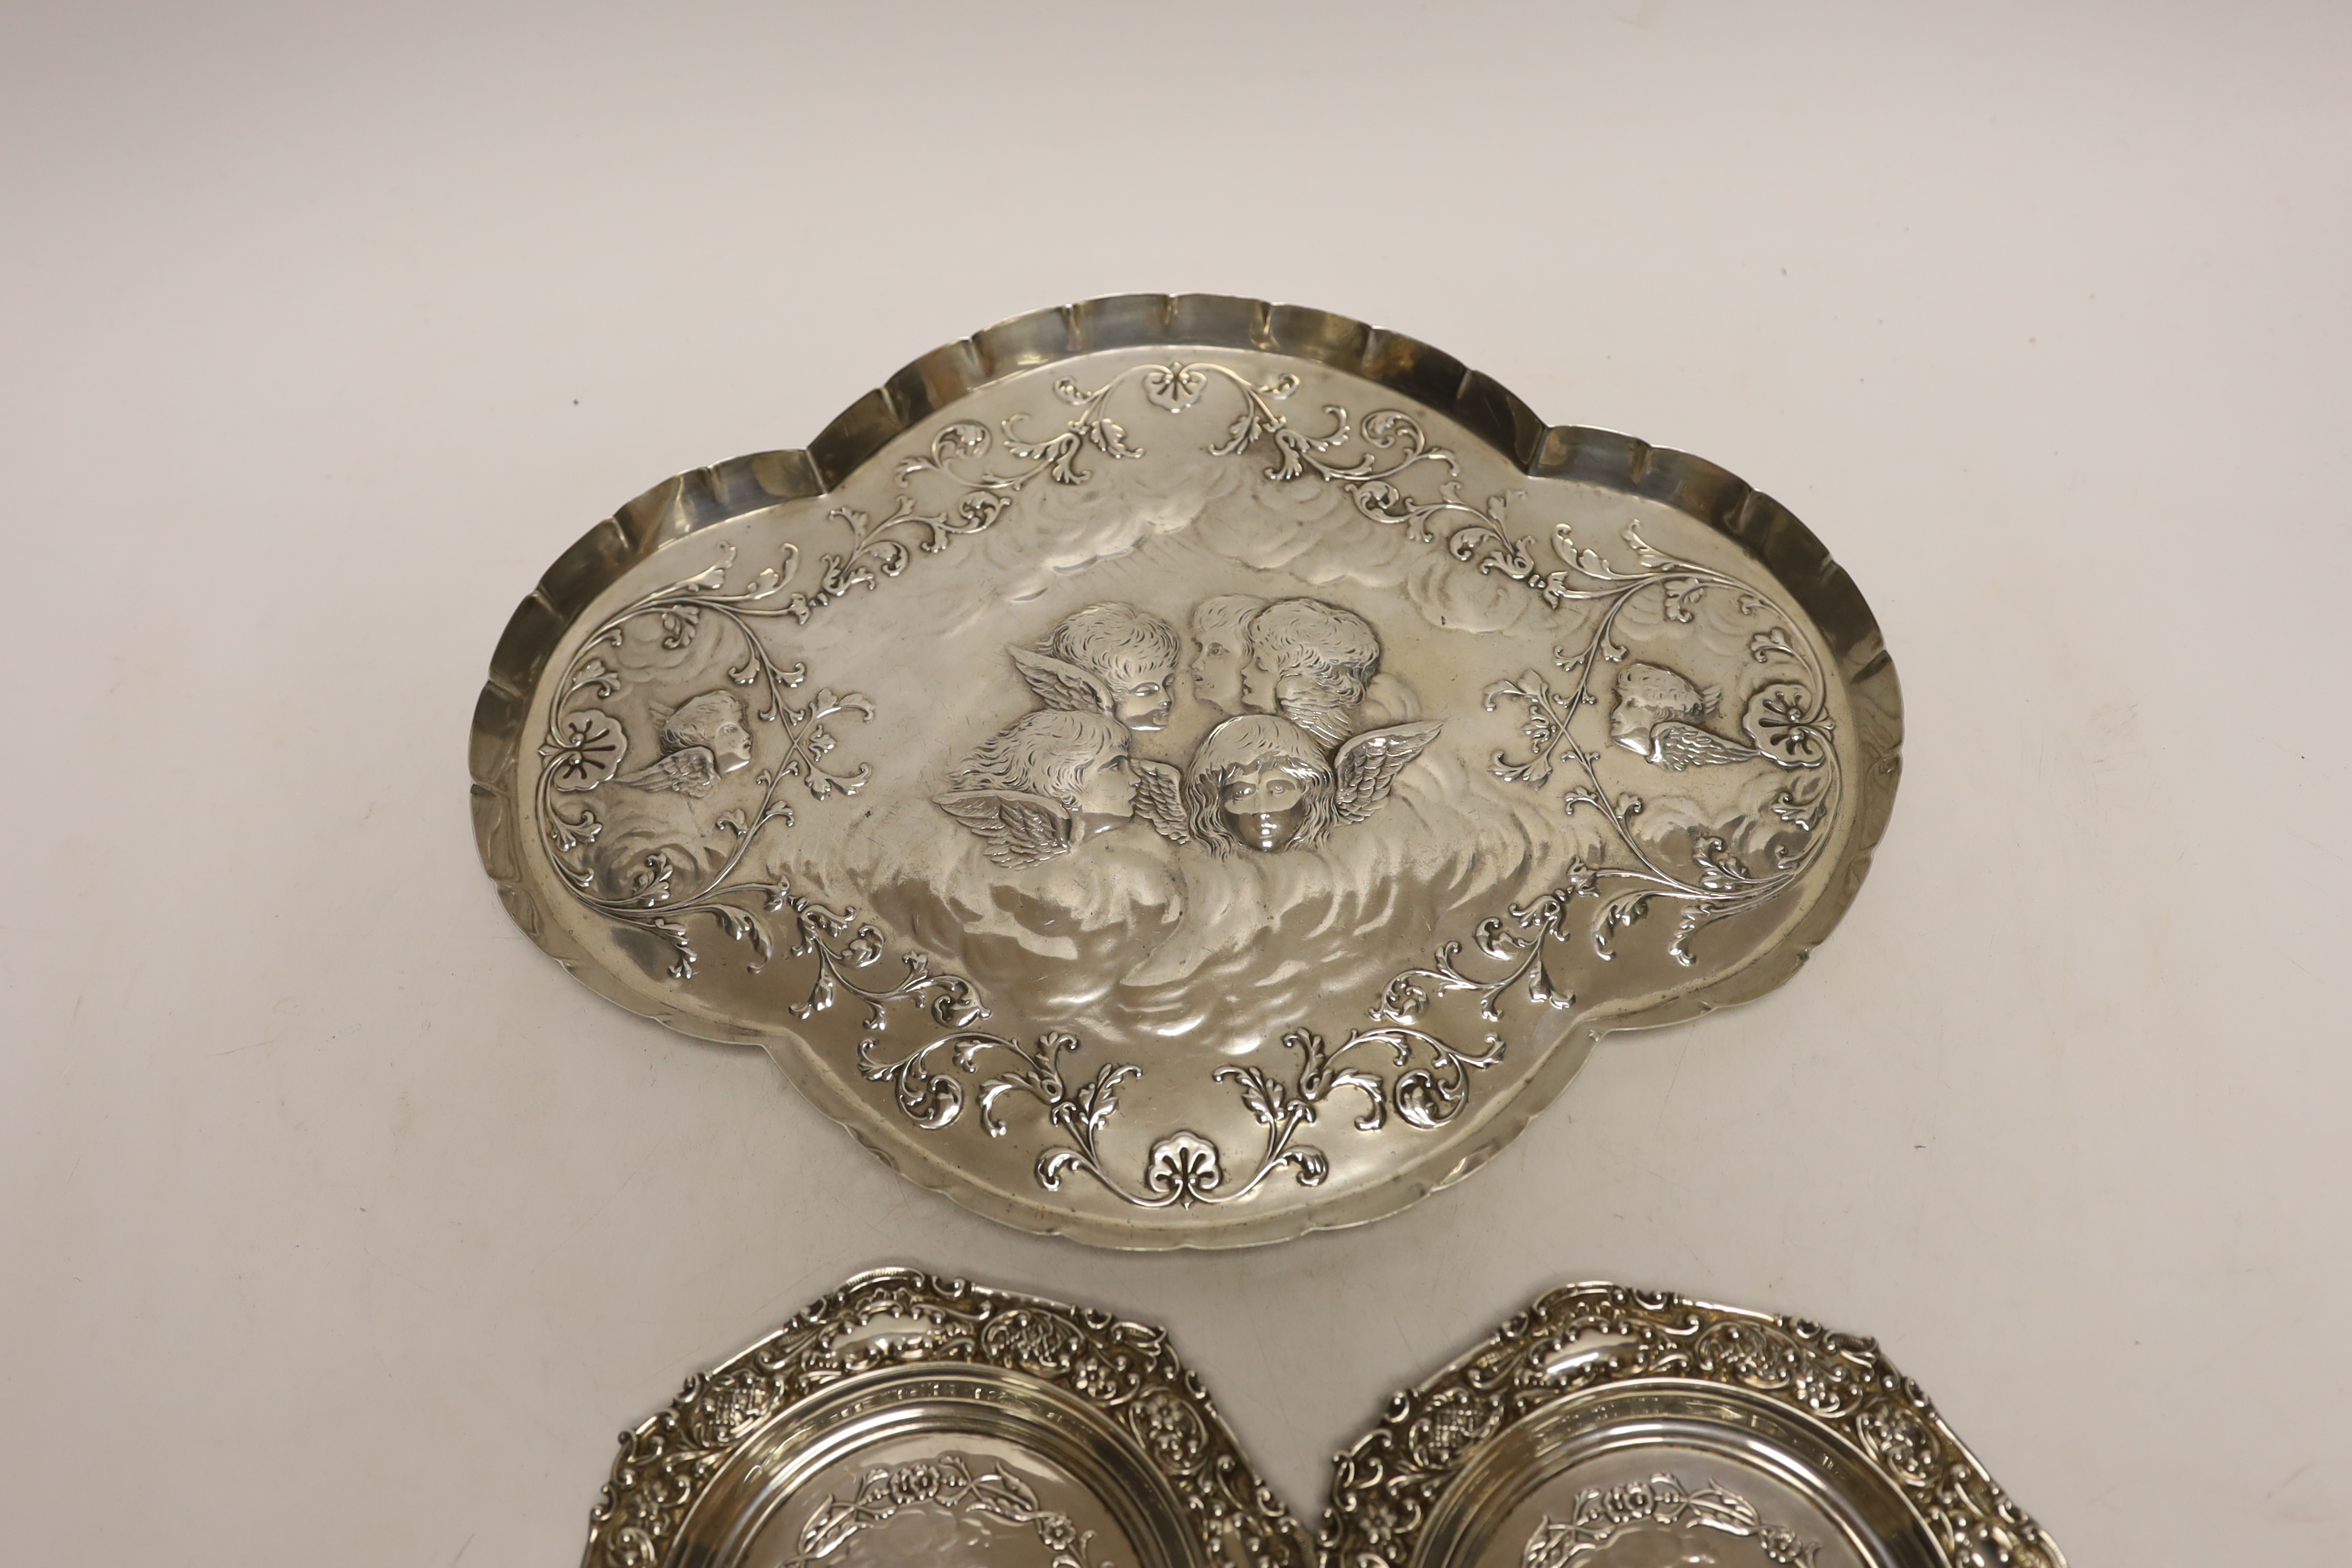 A late Victorian repousse silver dressing table tray with Reynold's Angels decoration, William Comyns, London, 1899, 30.9cm and a pair of smaller similar dishes by Henry Matthews, Birmingham, 1899, 14.2oz.